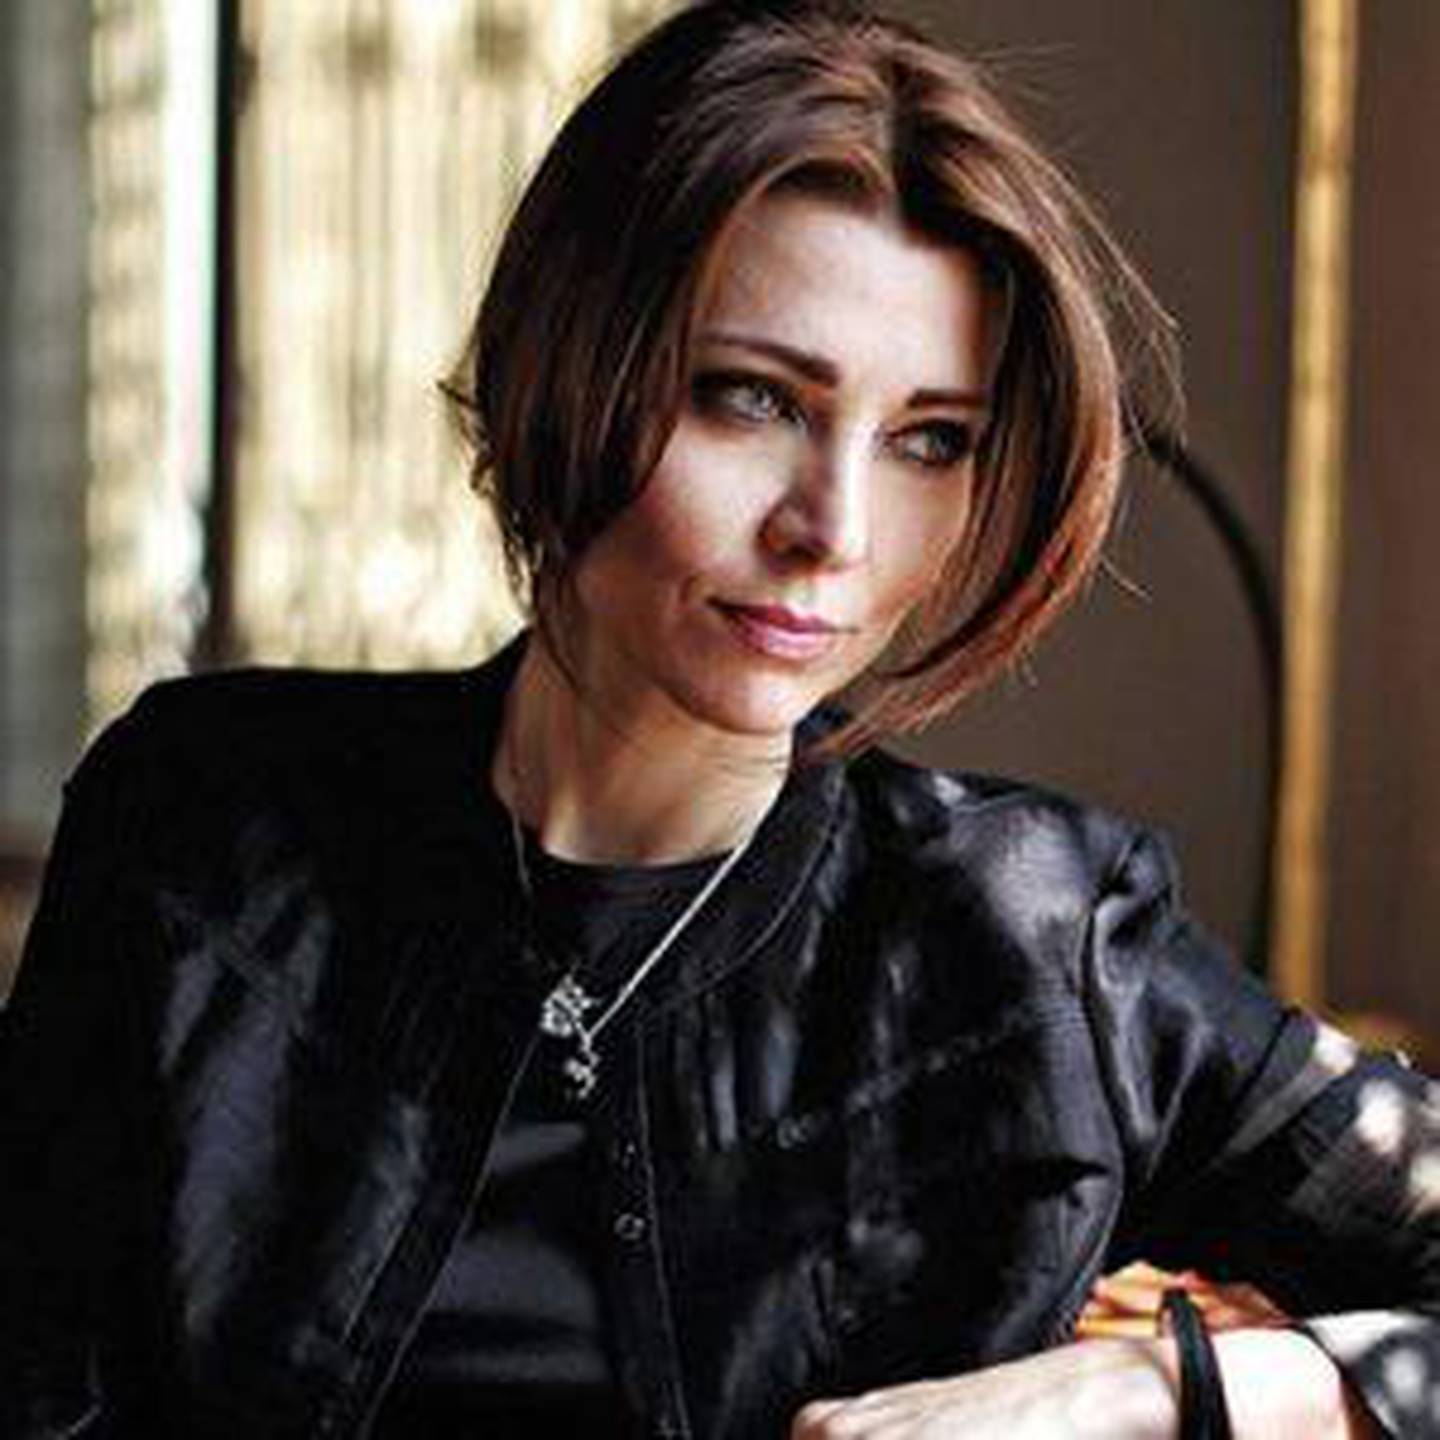 MFest will feature an appearance by award-winning Turkish author Elif Shafak